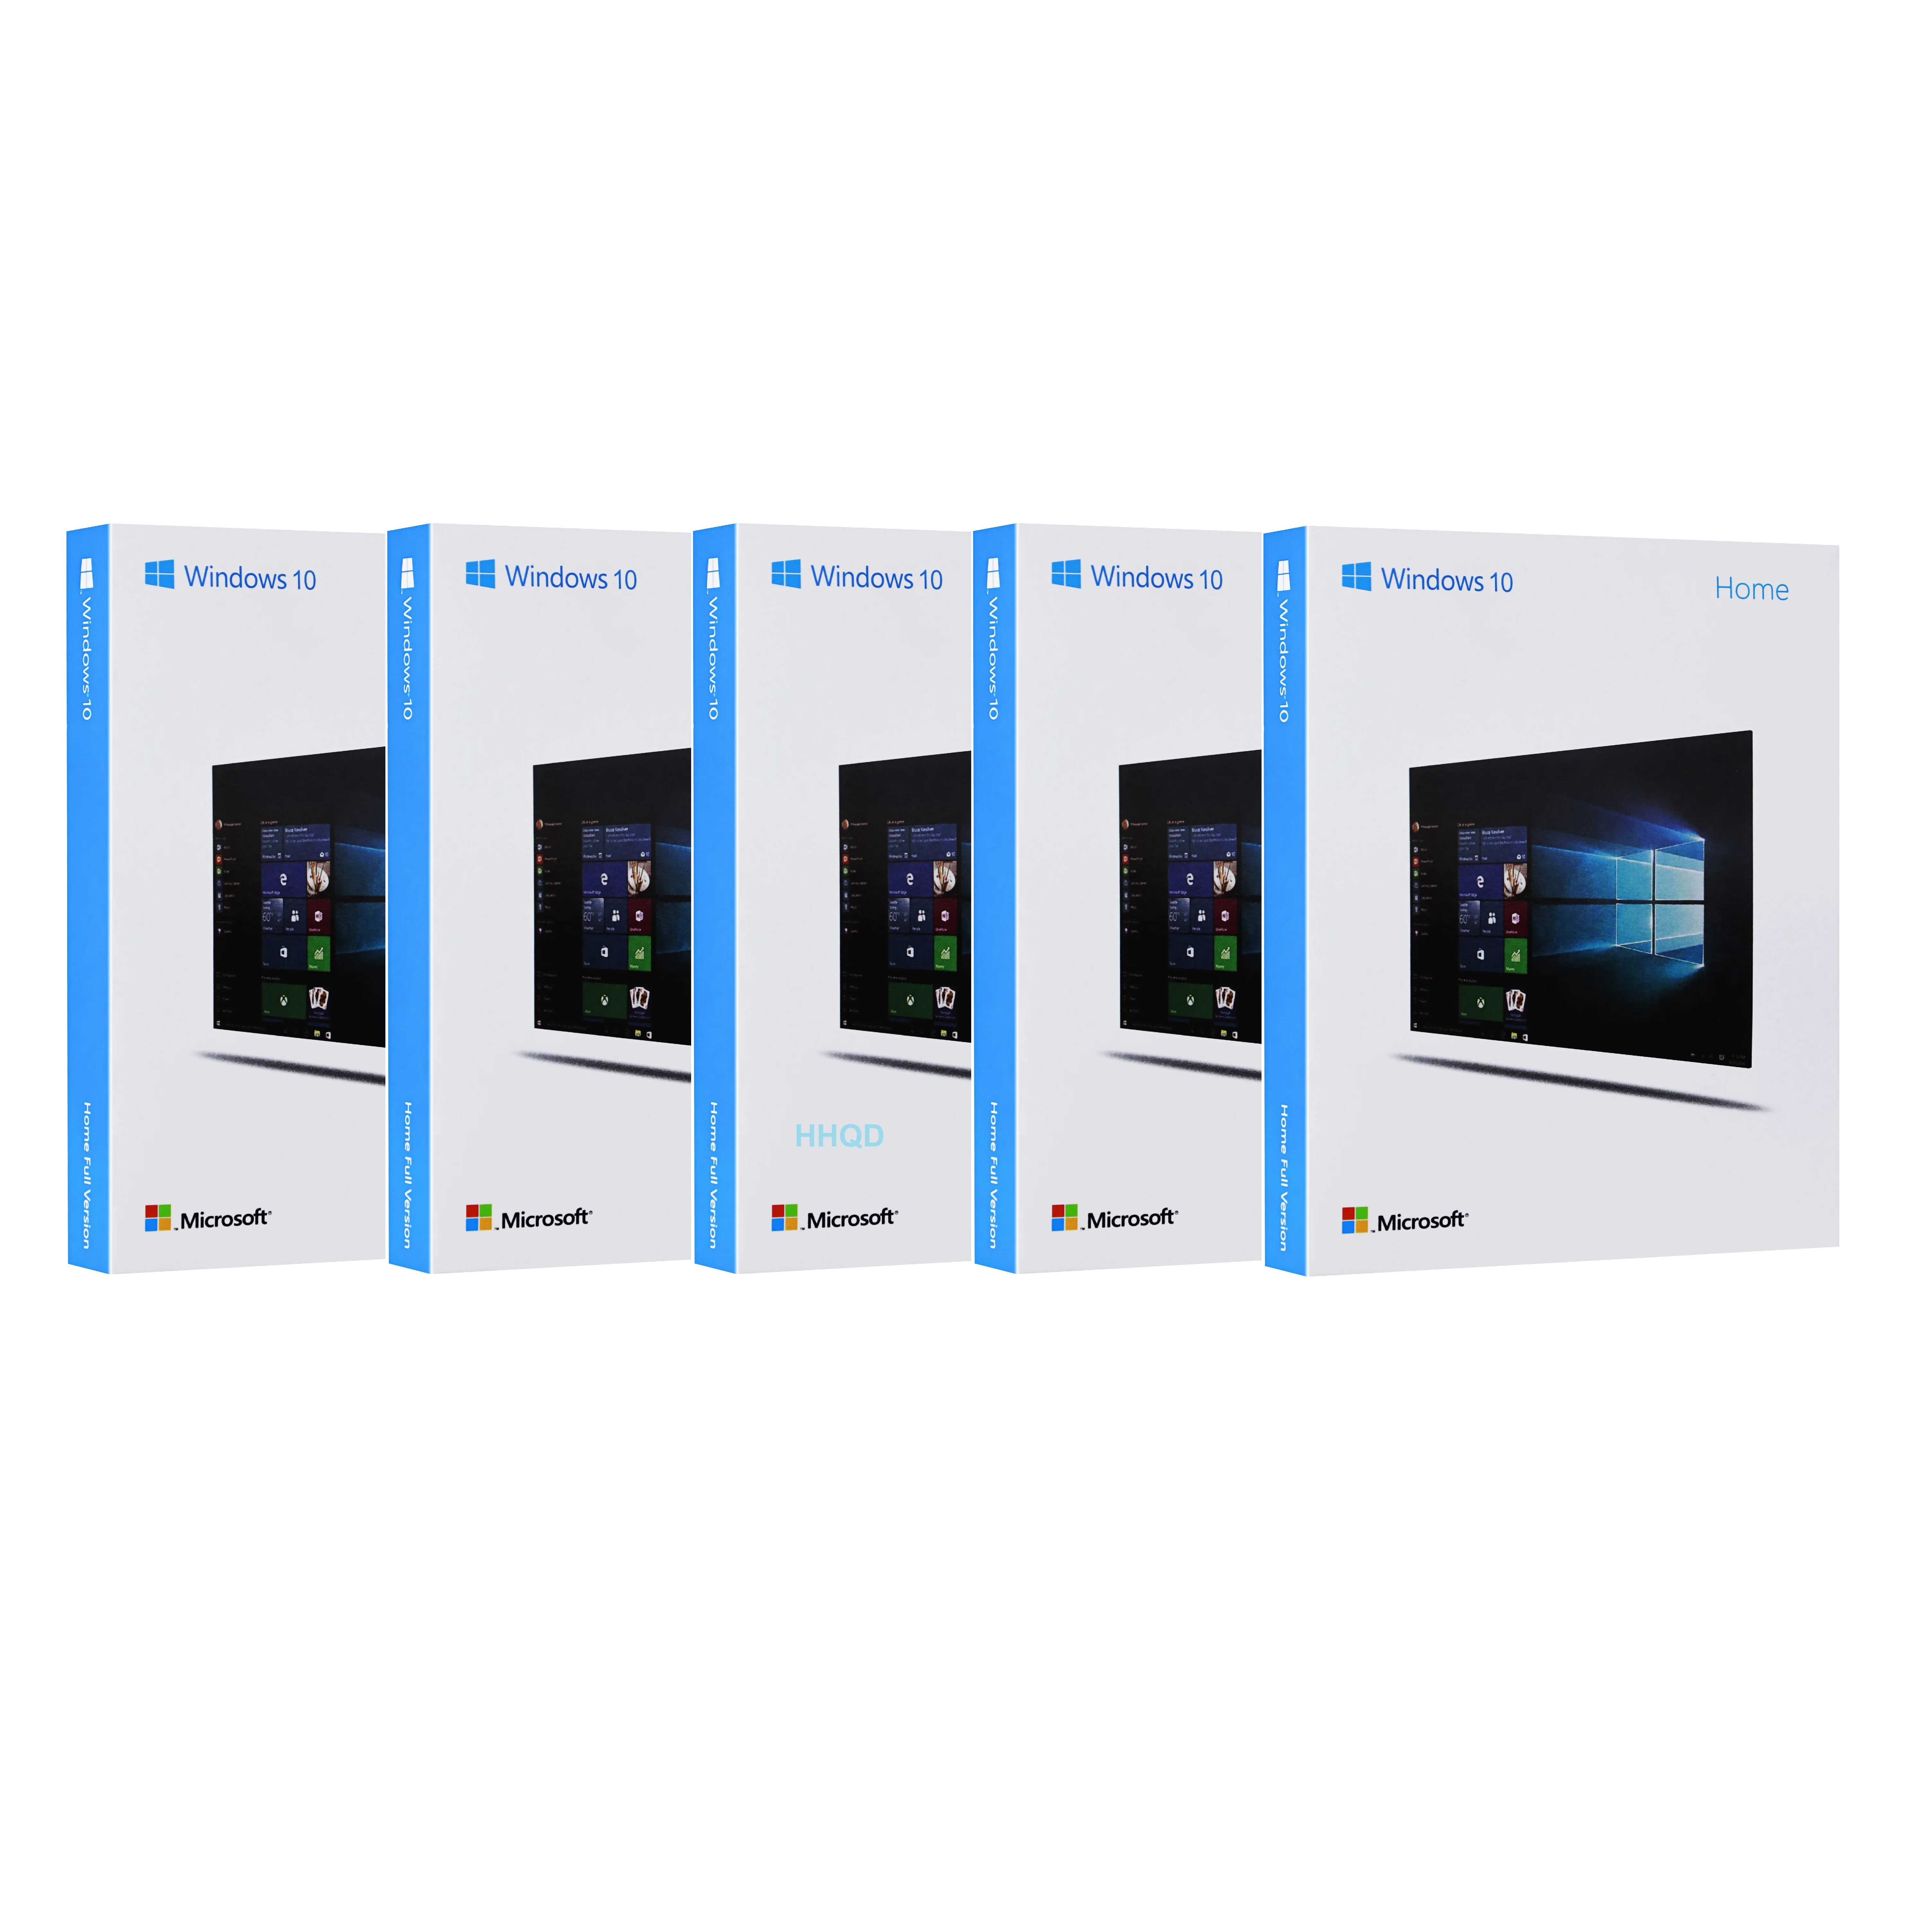 

Hot Sale Windows 10 Home Product Key Instant Delivery Win 10 Home License Online Activation USB3.0